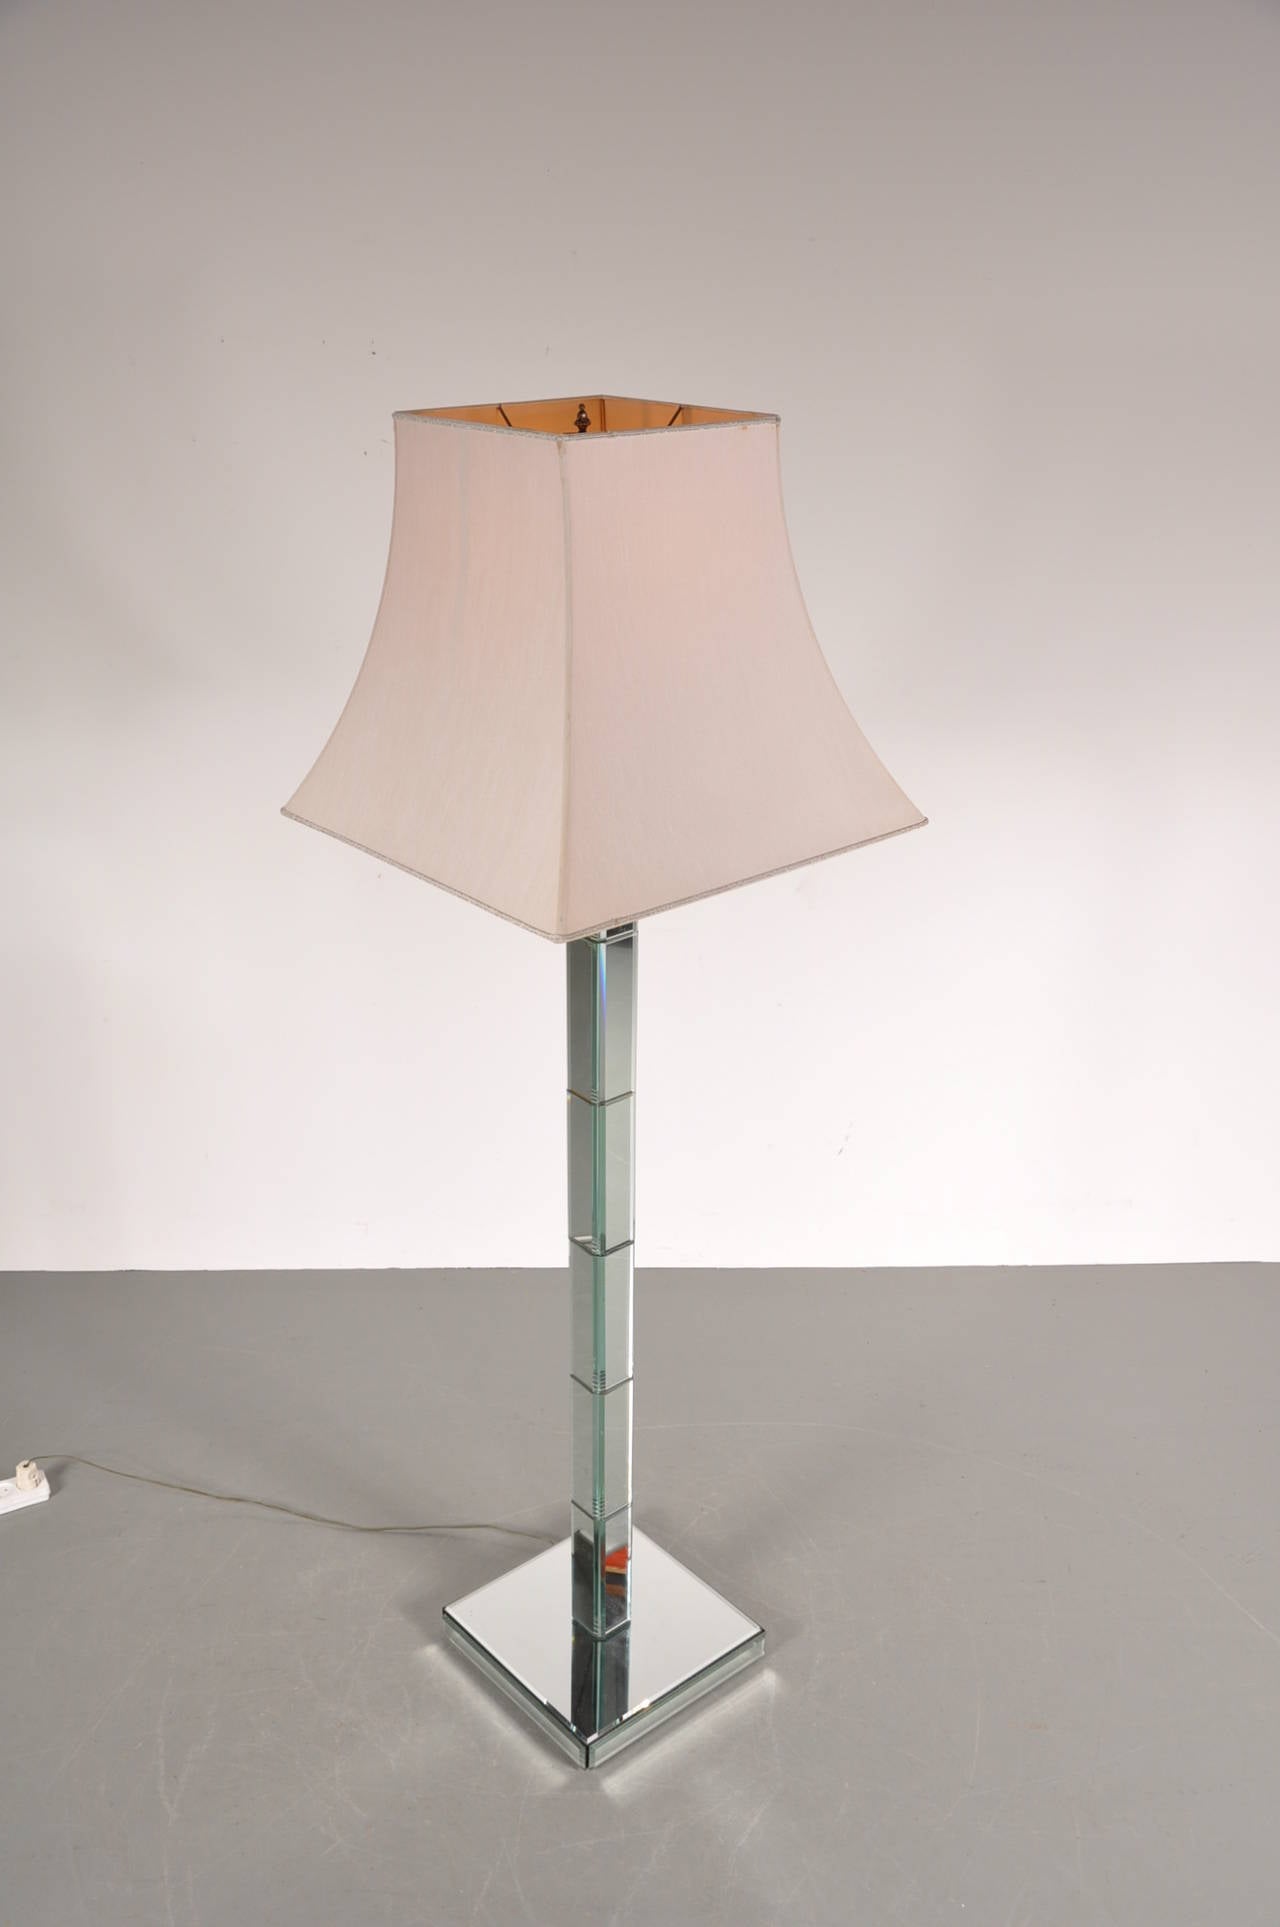 Beautiful floor lamp in the manner of Maison Jansen, manufactured in France around 1940.

This unique piece has an eye-catching mirror base on all sides, causing it to naturally blend in any interior. The glass is still in very good condition. It